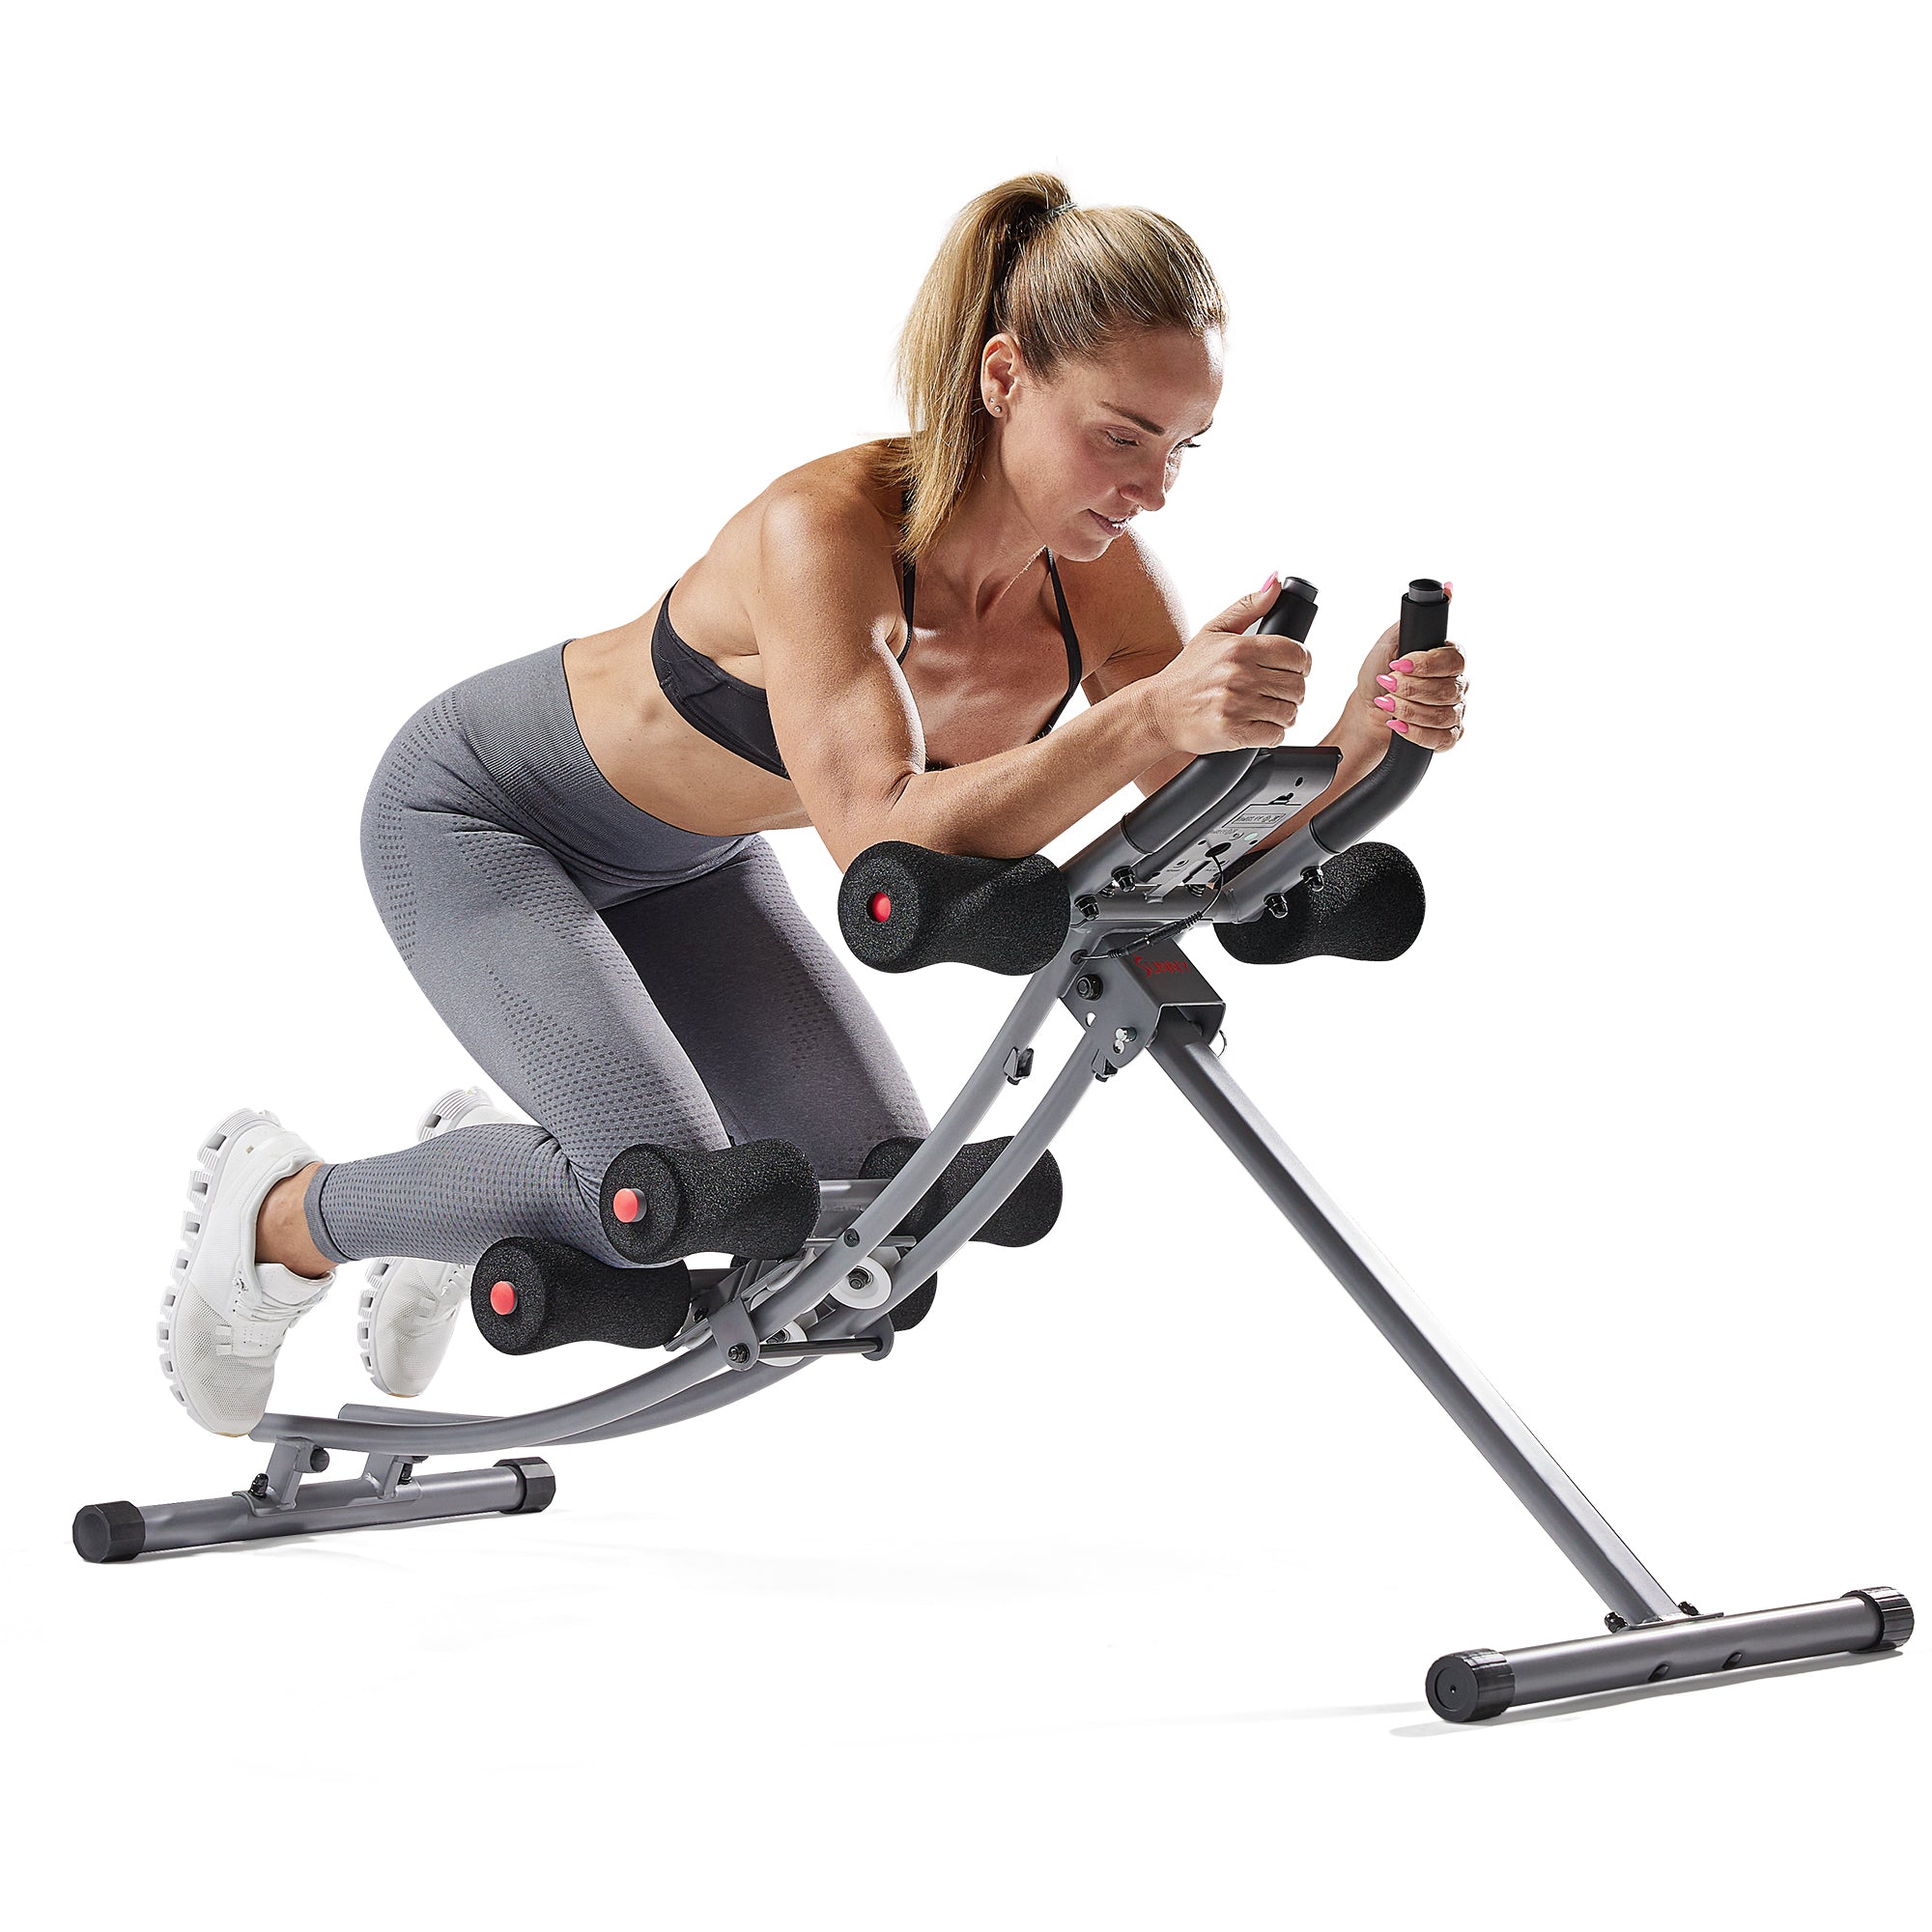 Wostoo Ab Machine Ab Workout Equipment For Core Abdominal, 55% OFF